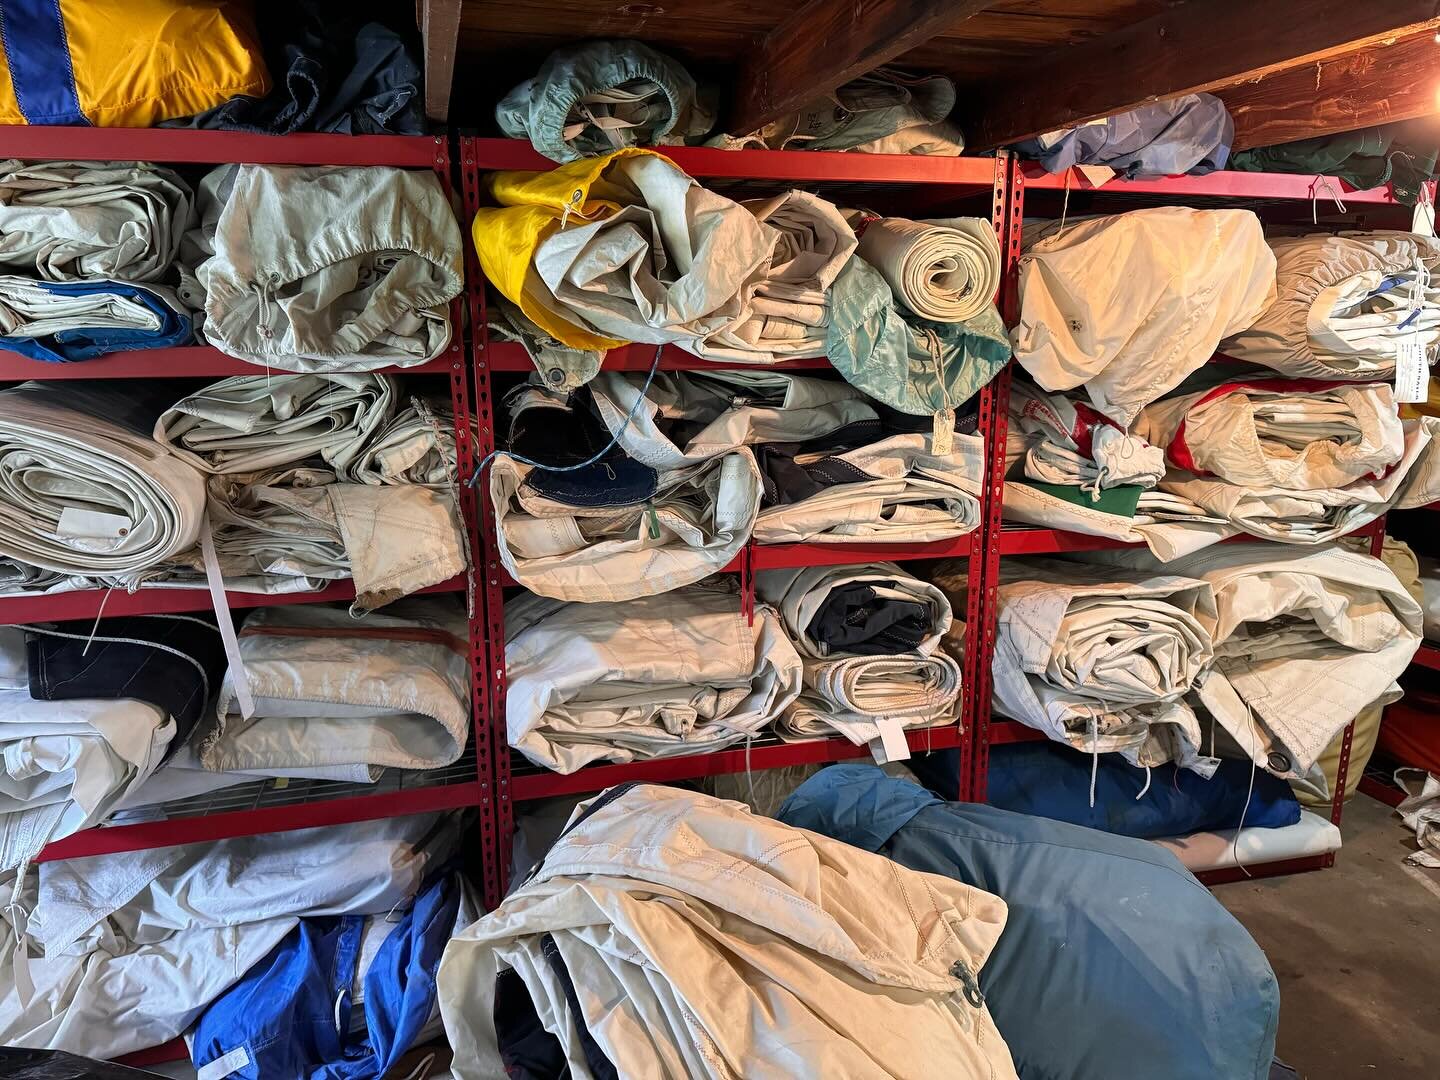 When is enough old sails enough in up-cycling? This is a part of our inventory of old sails that we use in the manufacturing of our products! Here at Metamorphic Gear, we want to share a behind the scenes view of upcycle bag manufacturing and show th